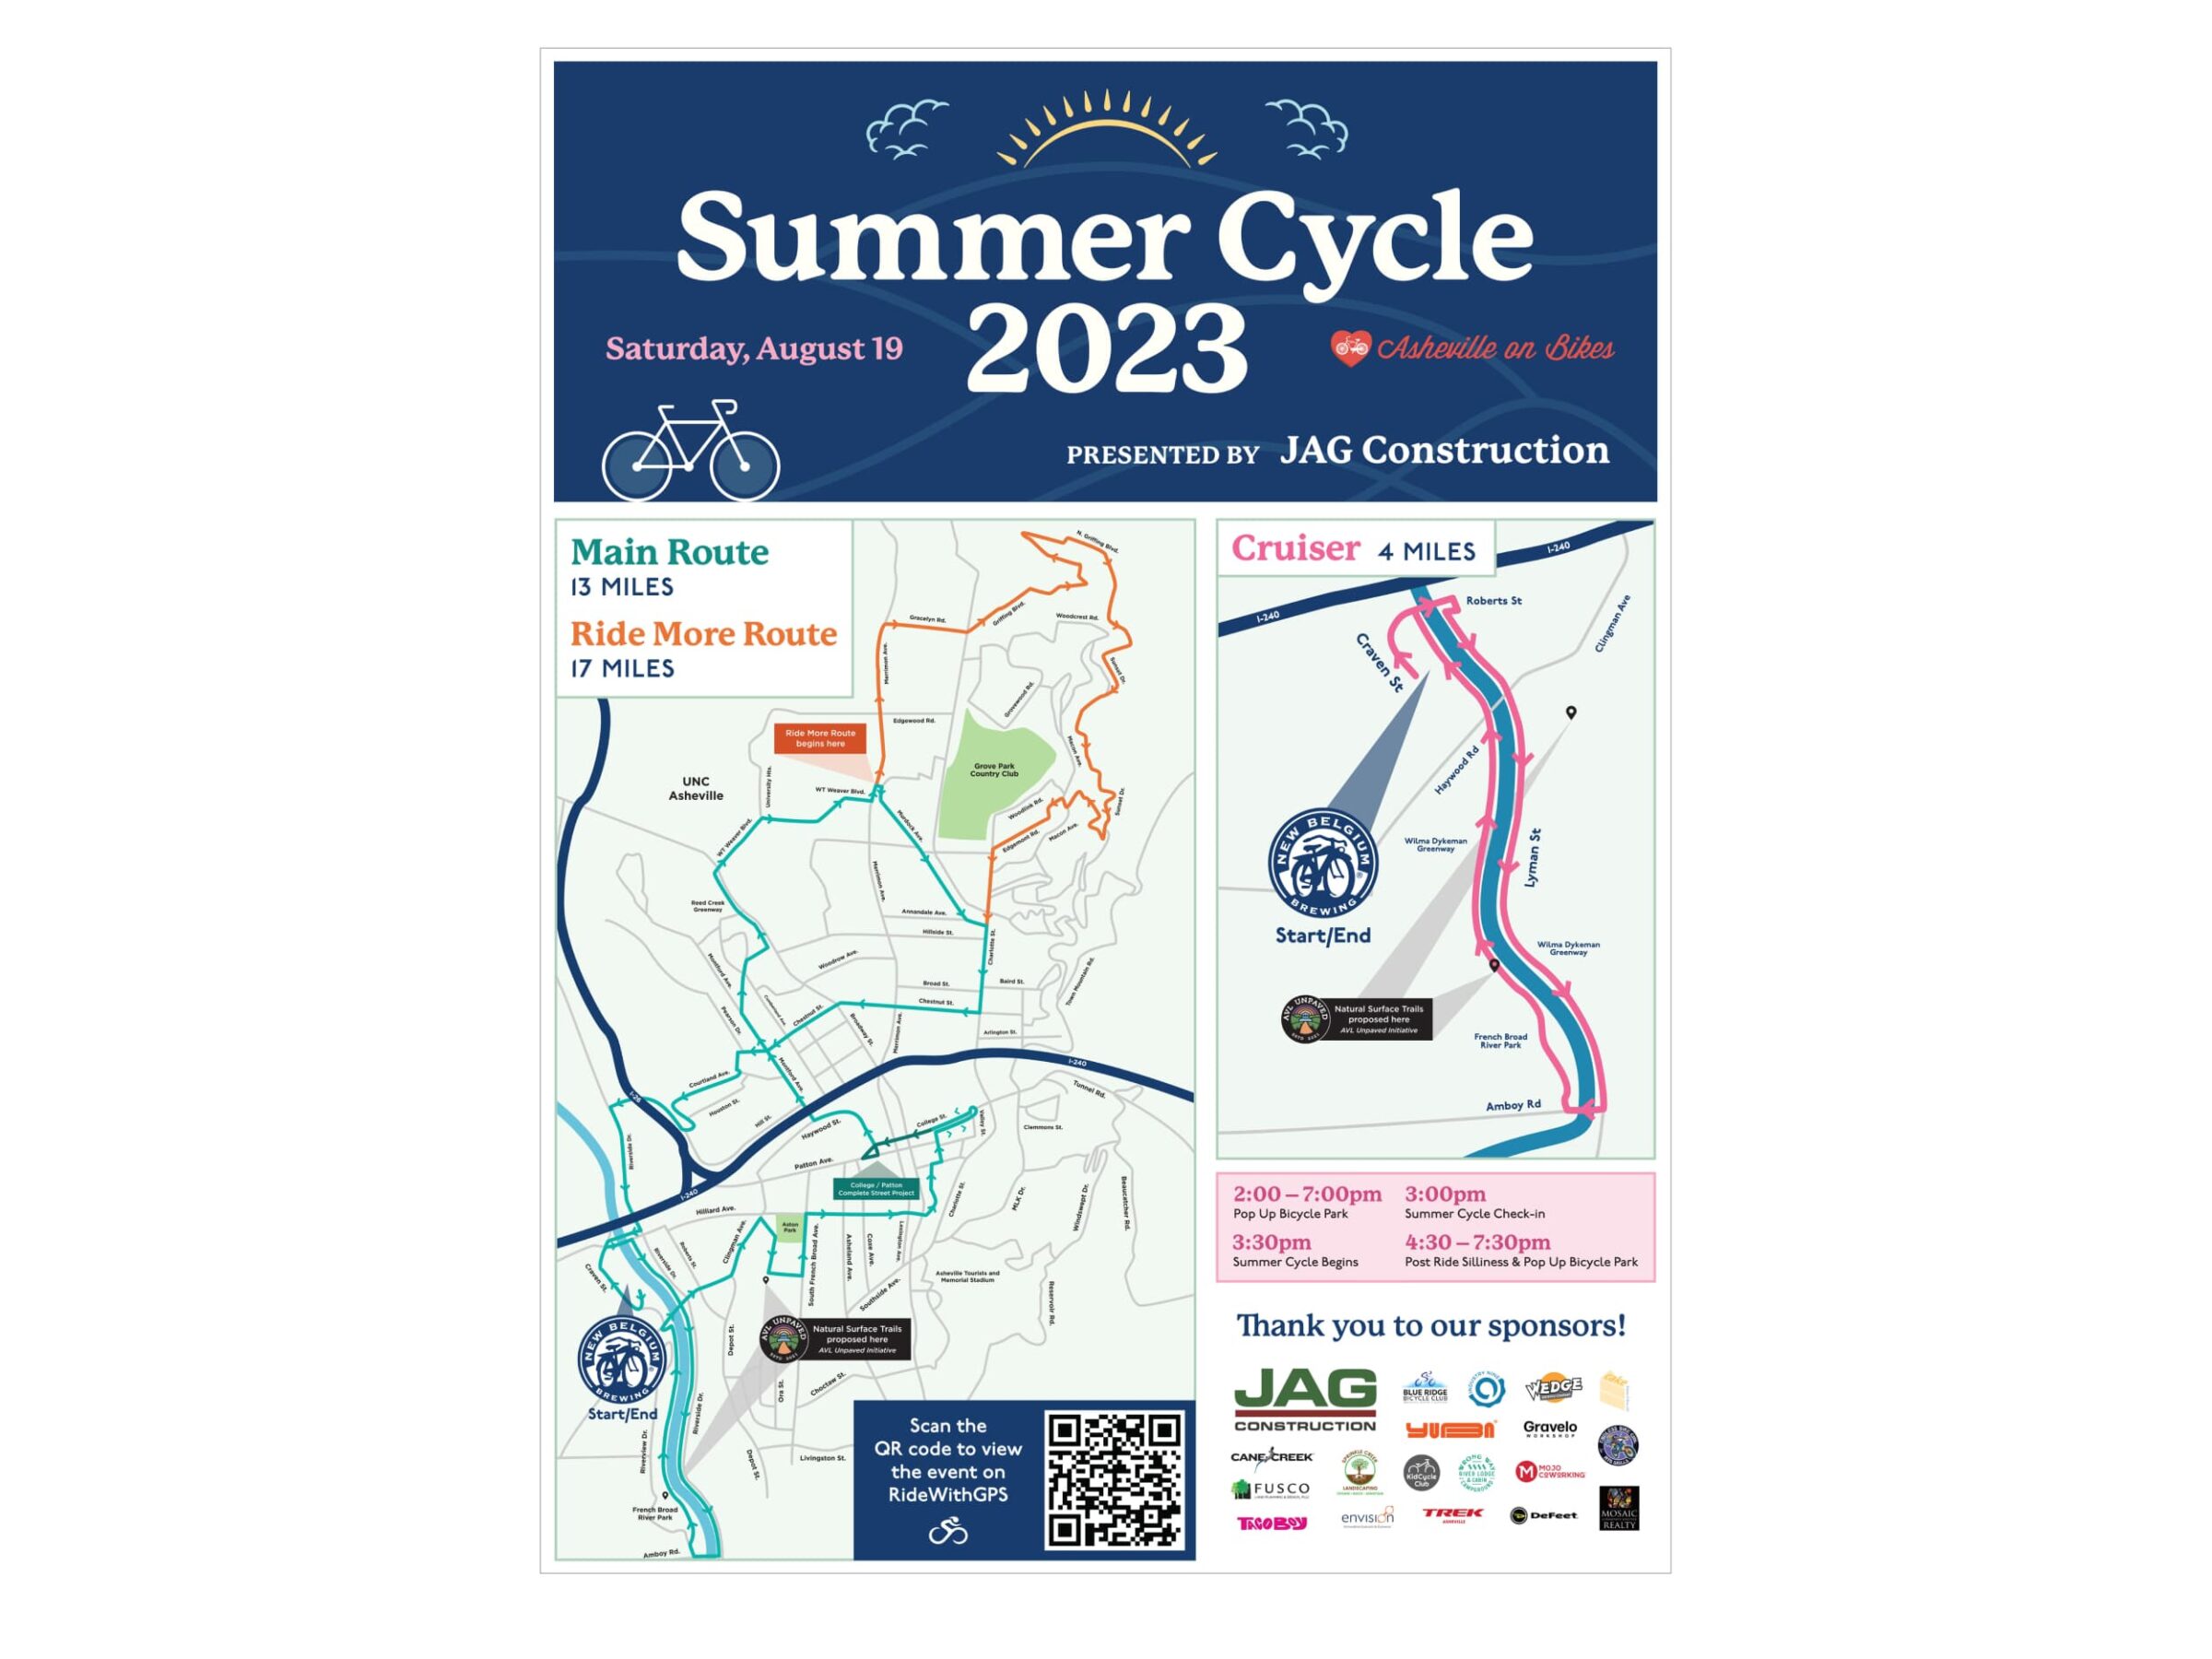 Summer Cycle, Asheville on Bikes